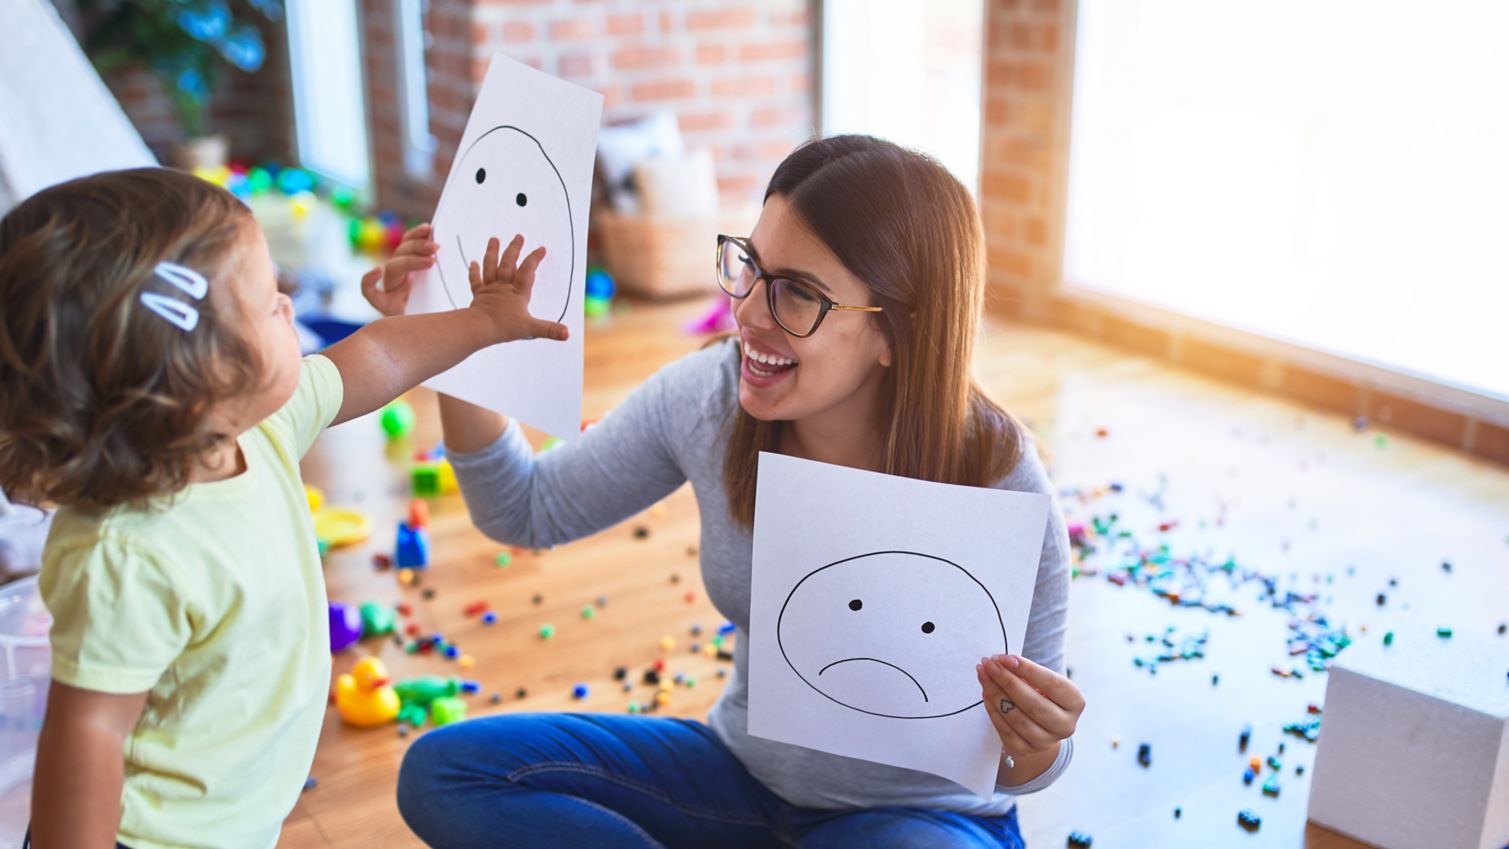 Child and adult playing games with face drawings